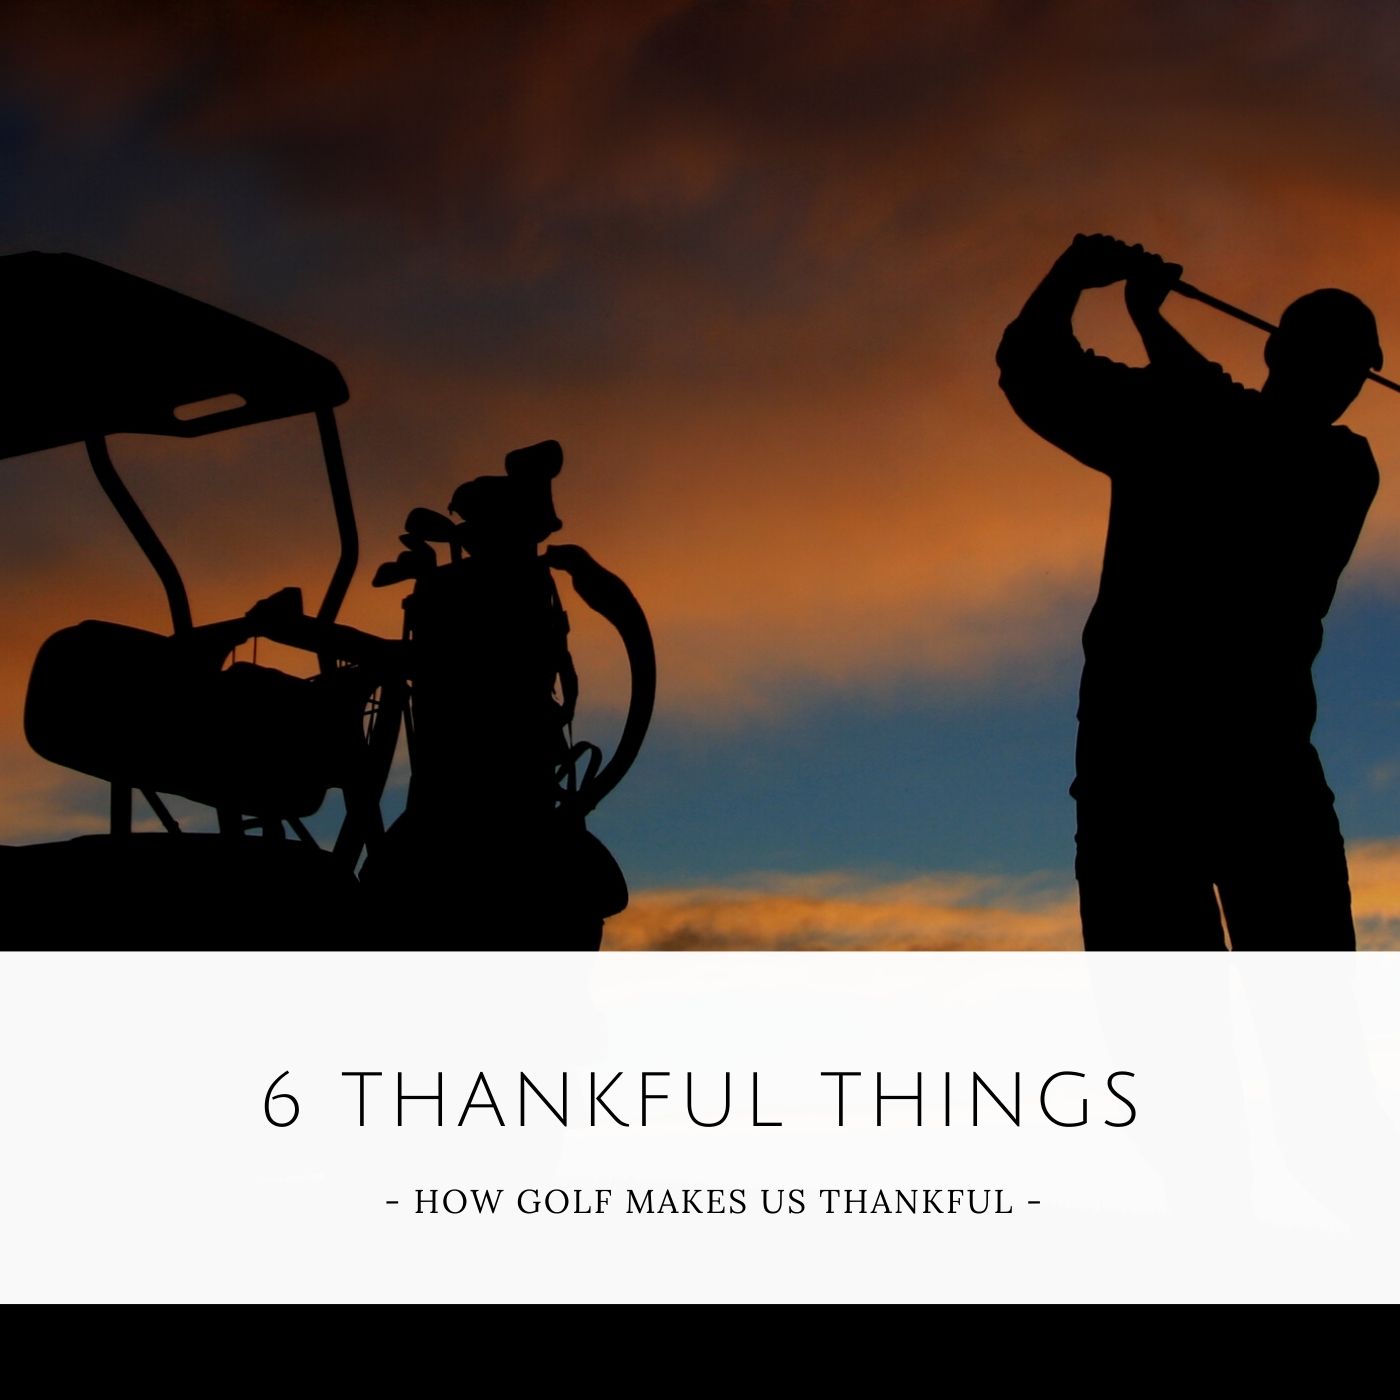 the gift of golf - 6 things golf makes us thankful for